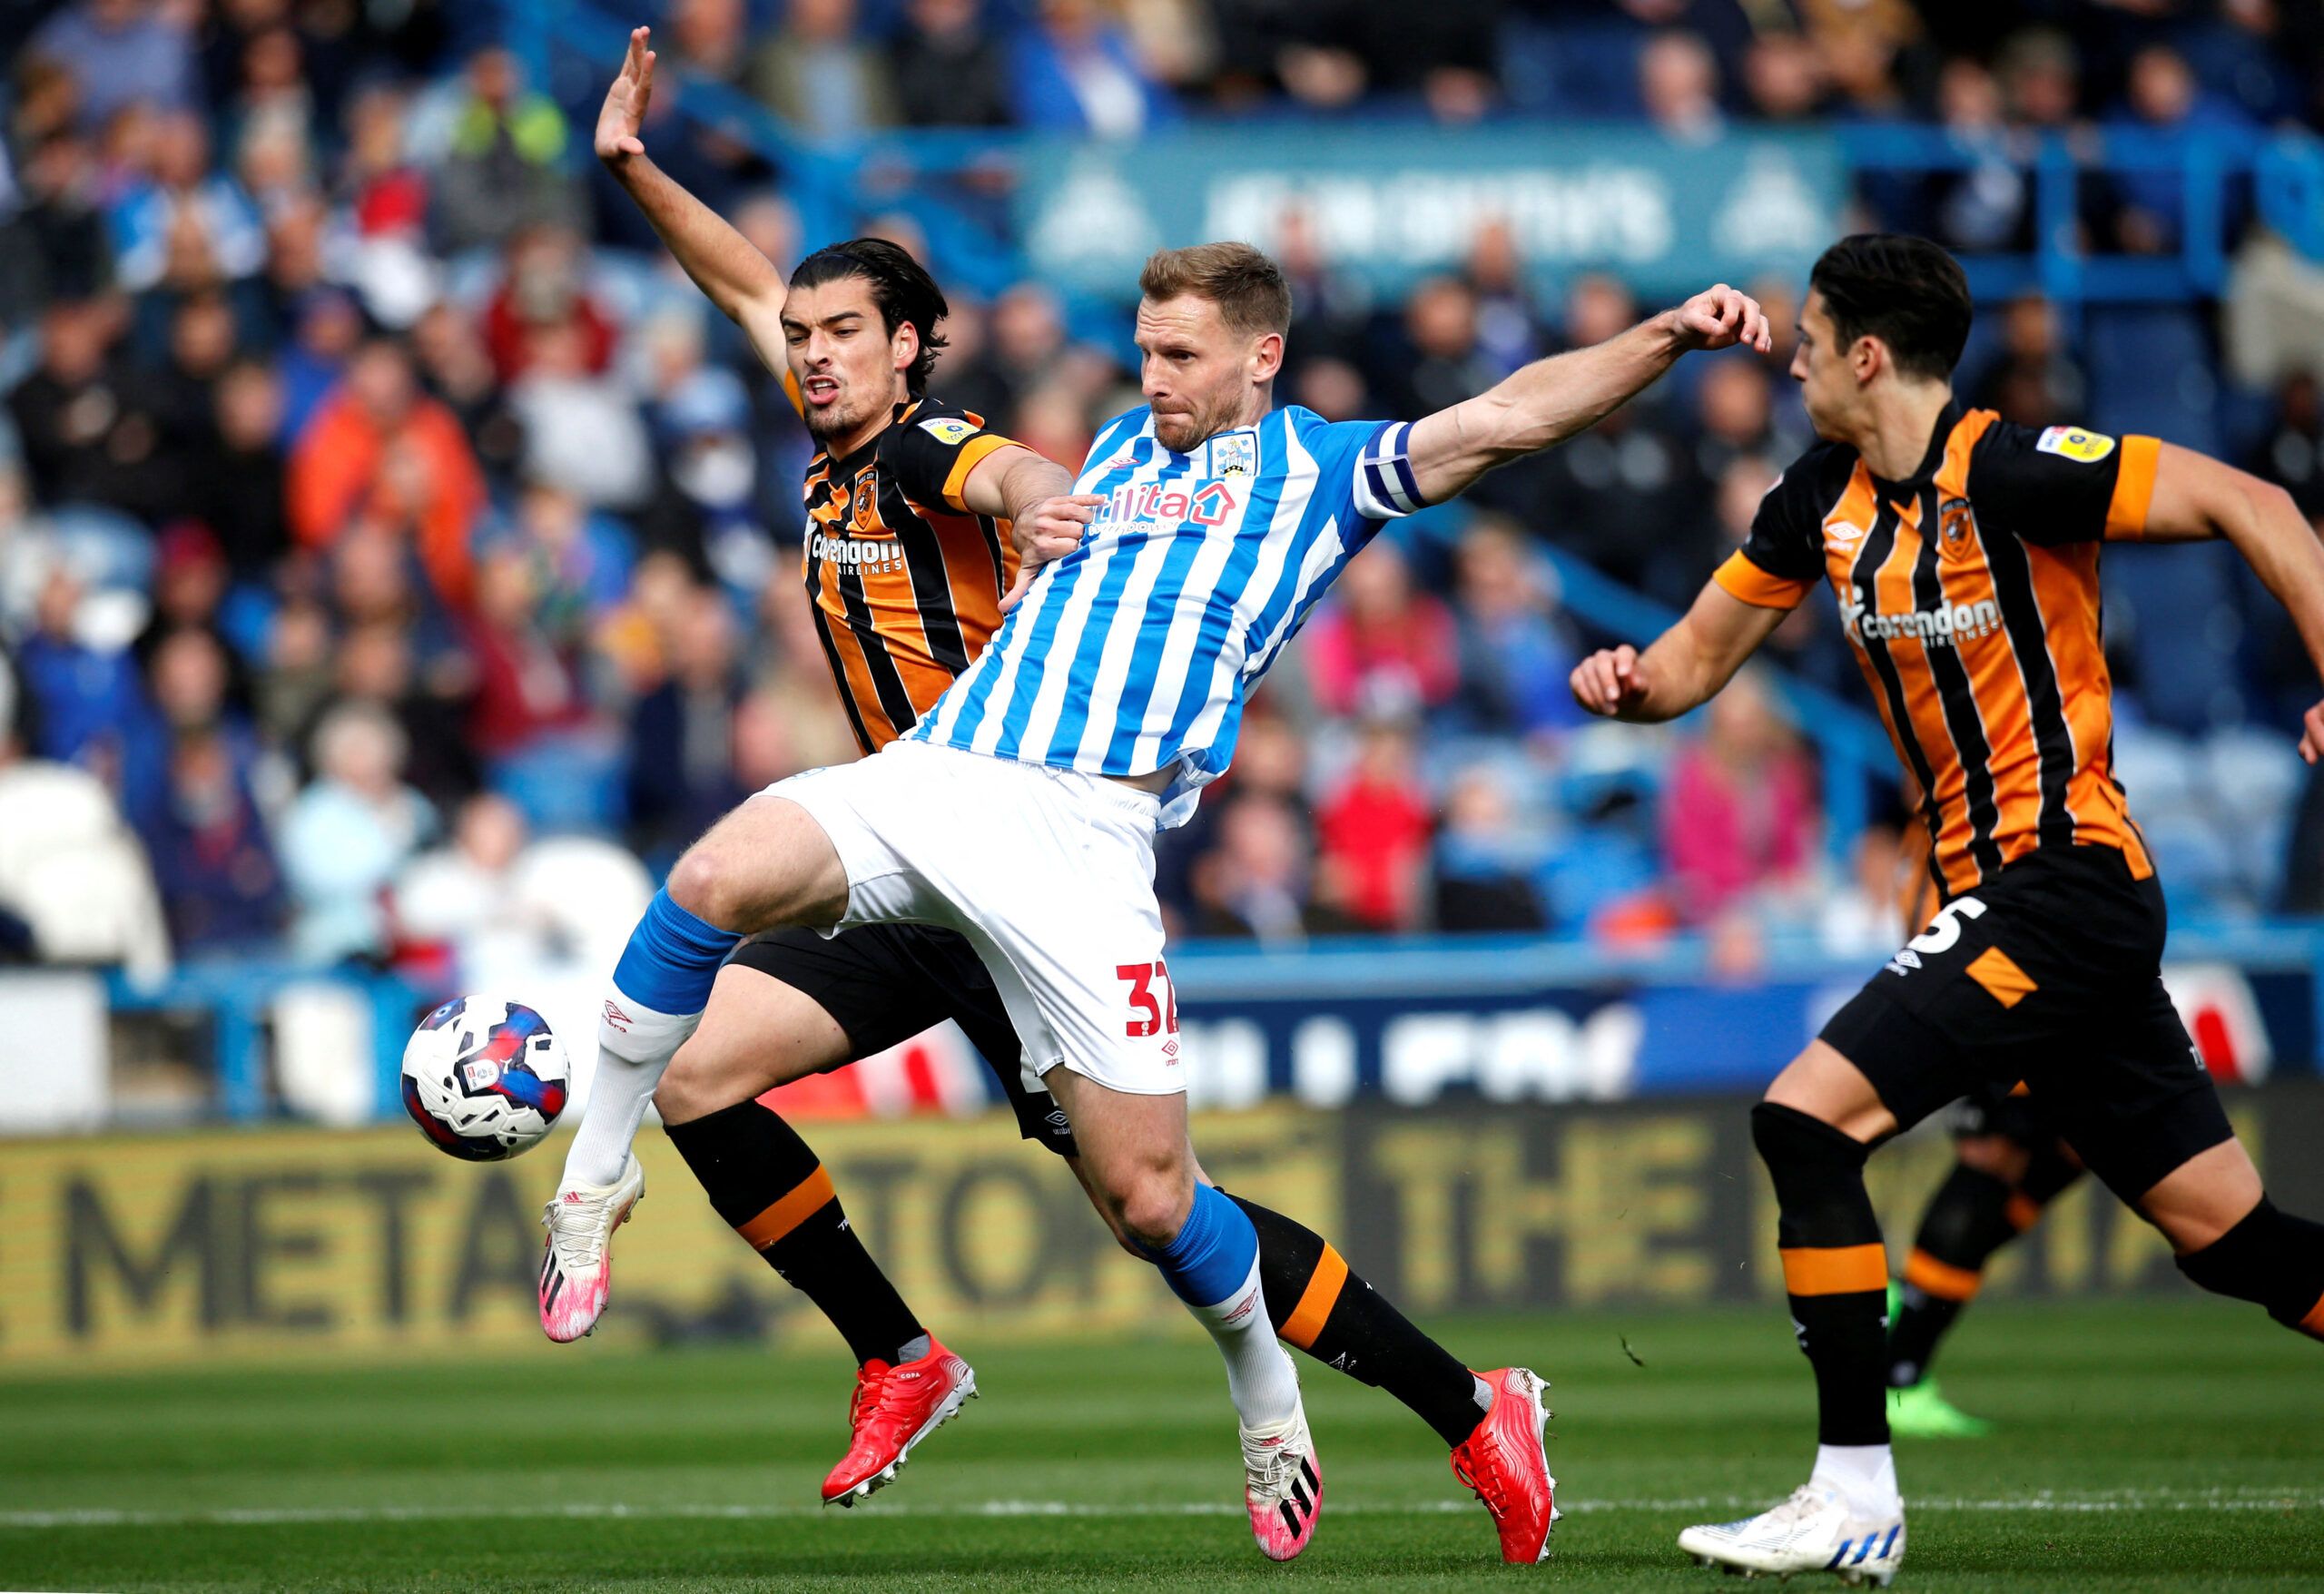 Soccer Football - Championship - Huddersfield Town v Hull City - John Smith's Stadium, Huddersfield, Britain - October 9, 2022 Huddersfield Town's Tom Lees shoots at goal Action Images/Ed Sykes  EDITORIAL USE ONLY. No use with unauthorized audio, video, data, fixture lists, club/league logos or 